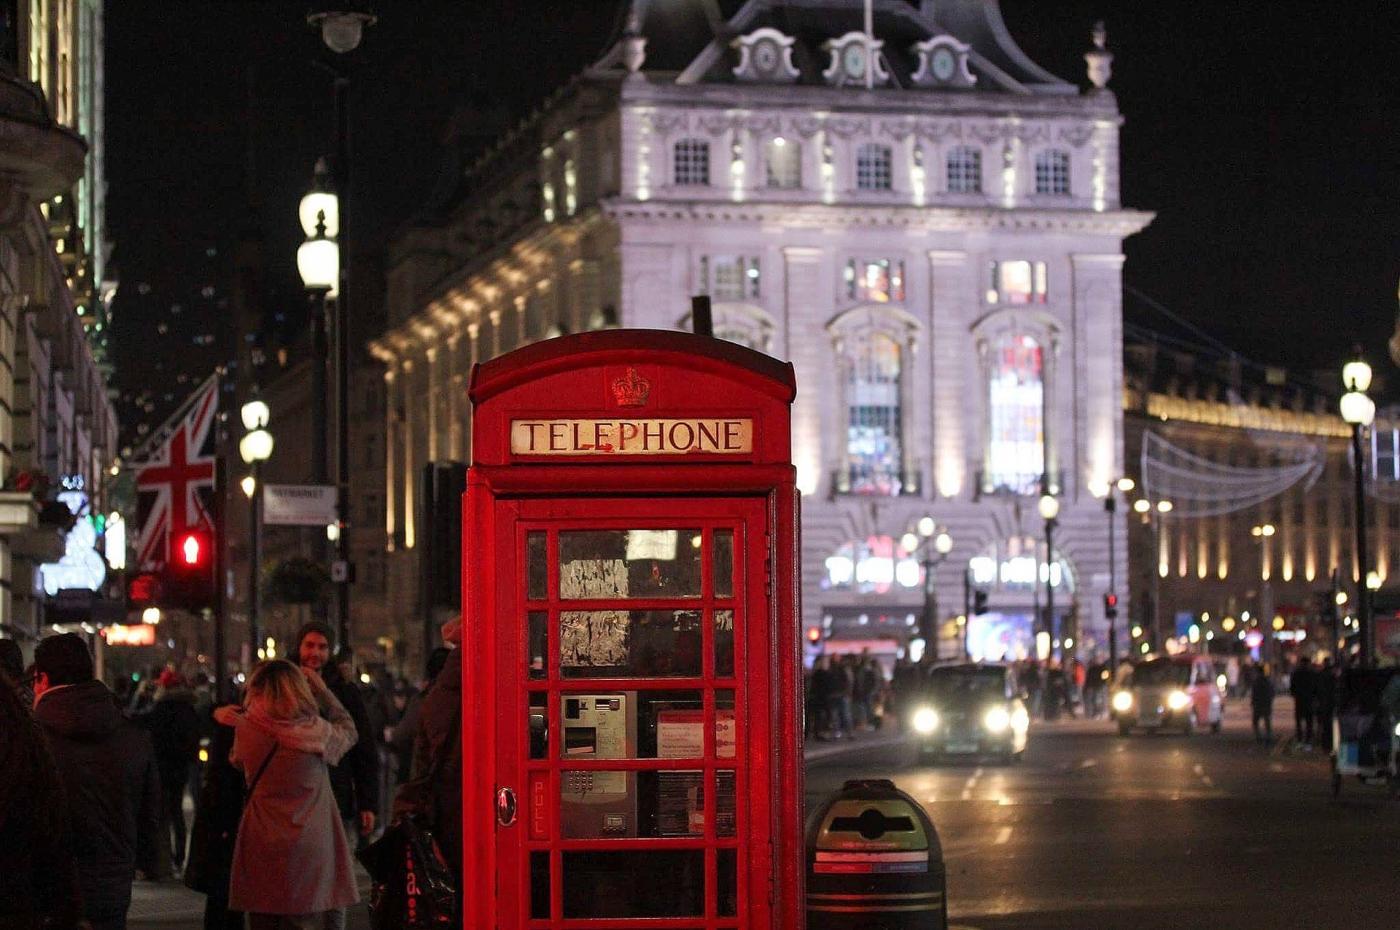 Is a love of phone booths enough reason to stay in a country? 